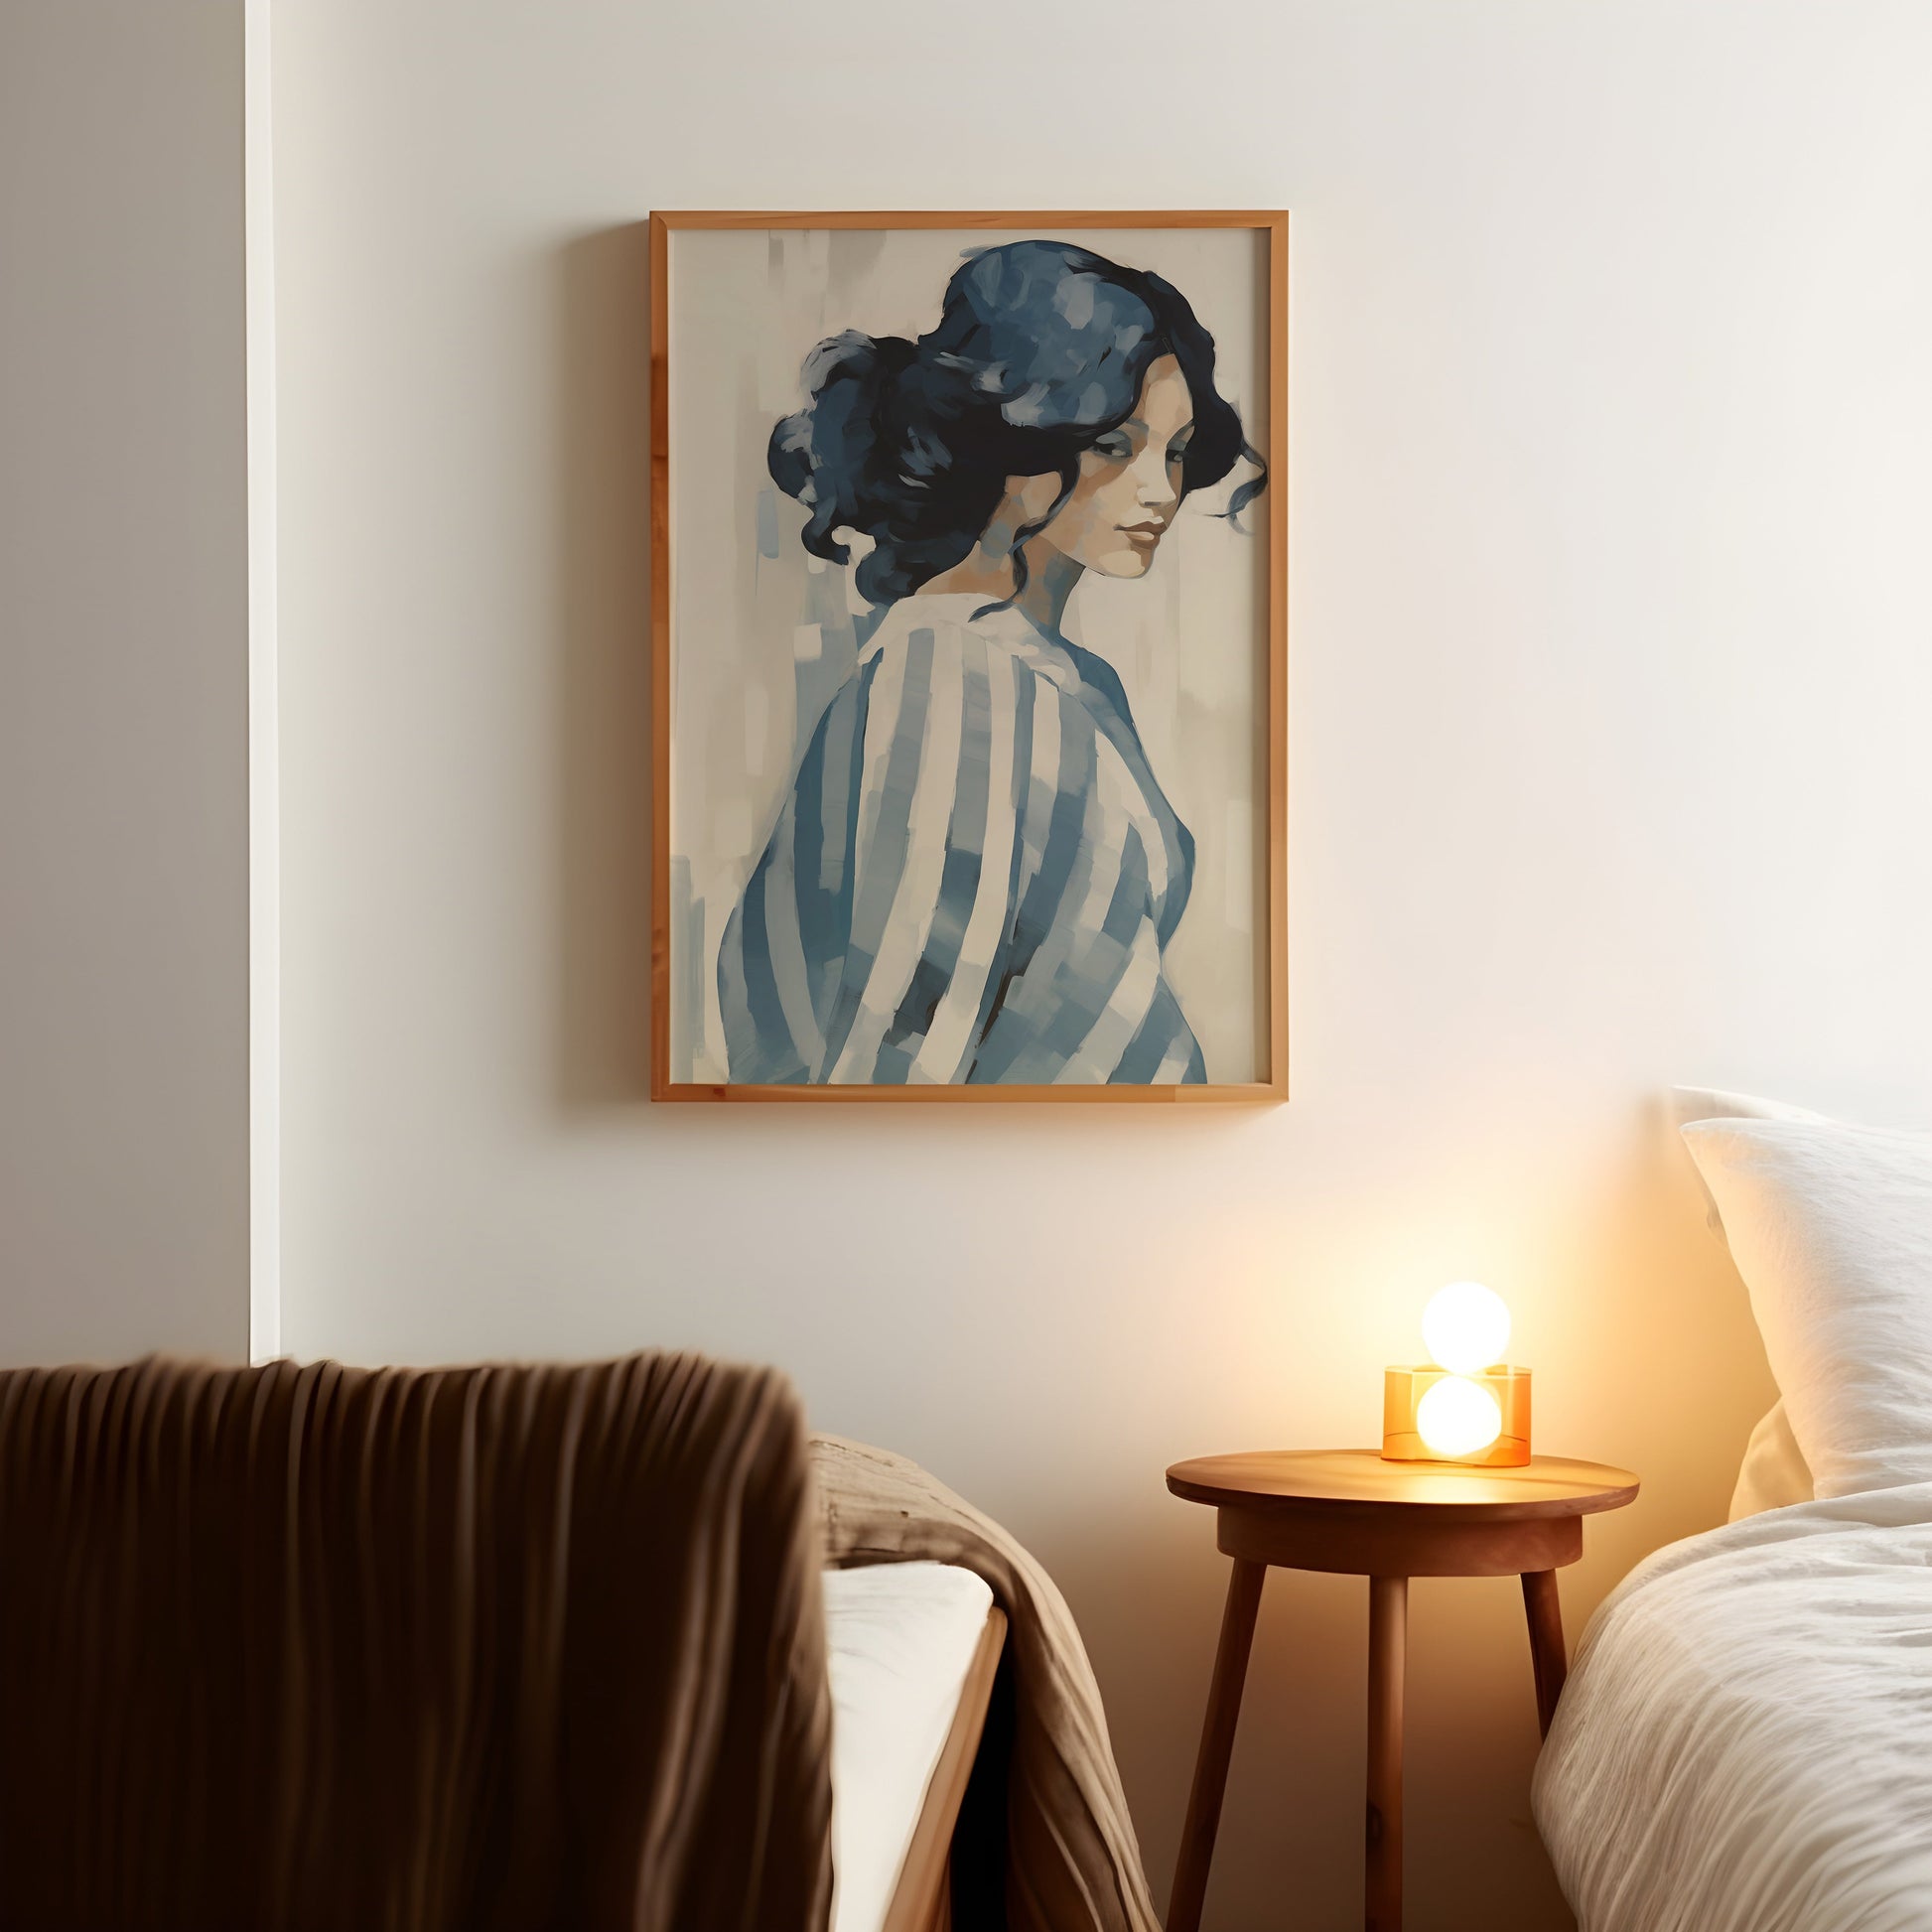 a painting of a woman in a striped shirt hangs above a bed